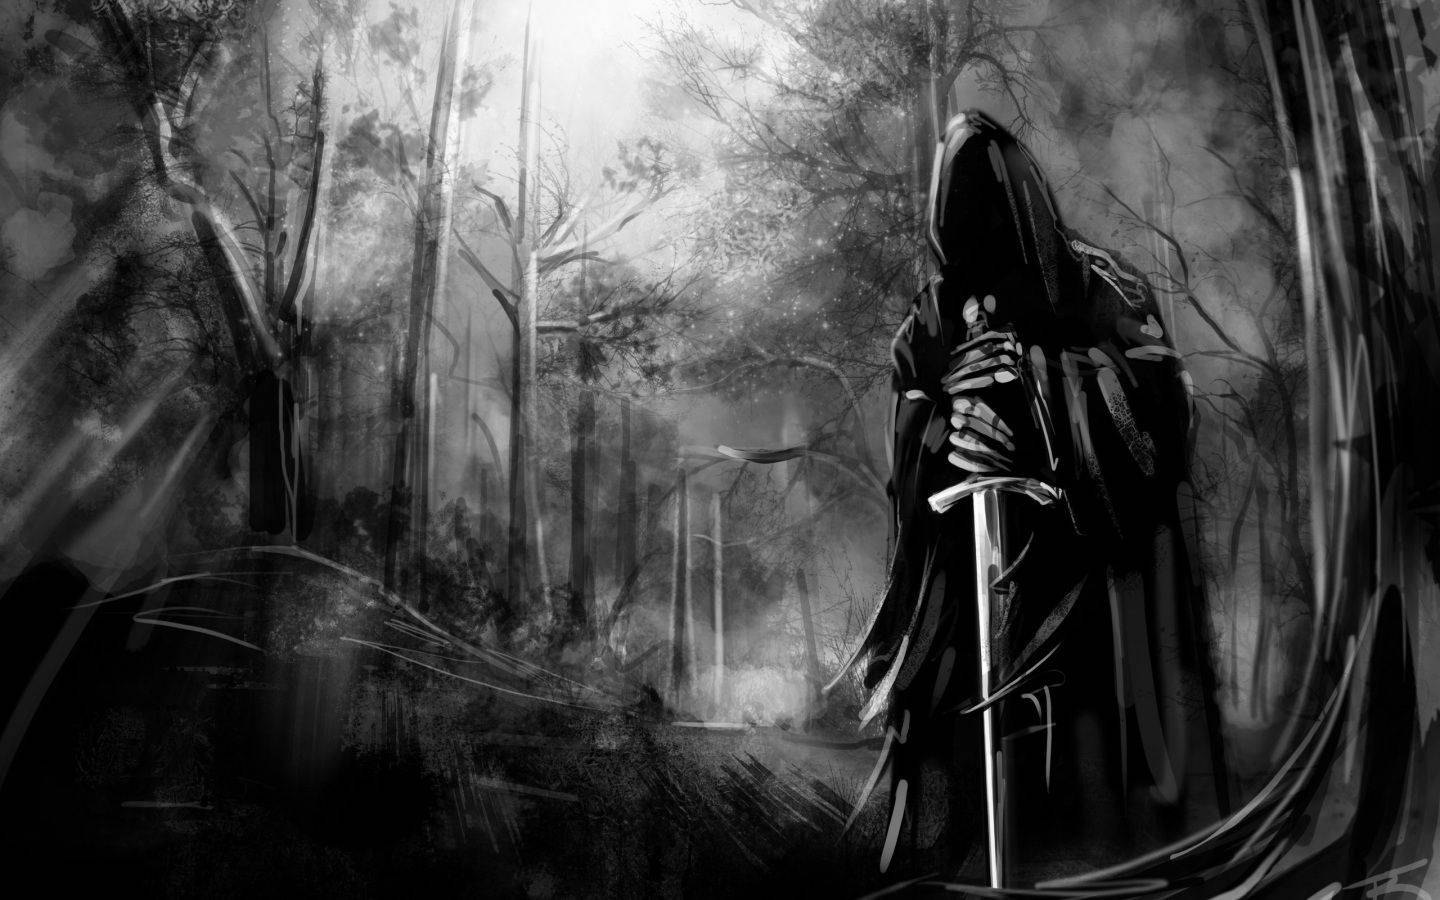 A foreboding figure roaming in a Gothic forest Wallpaper